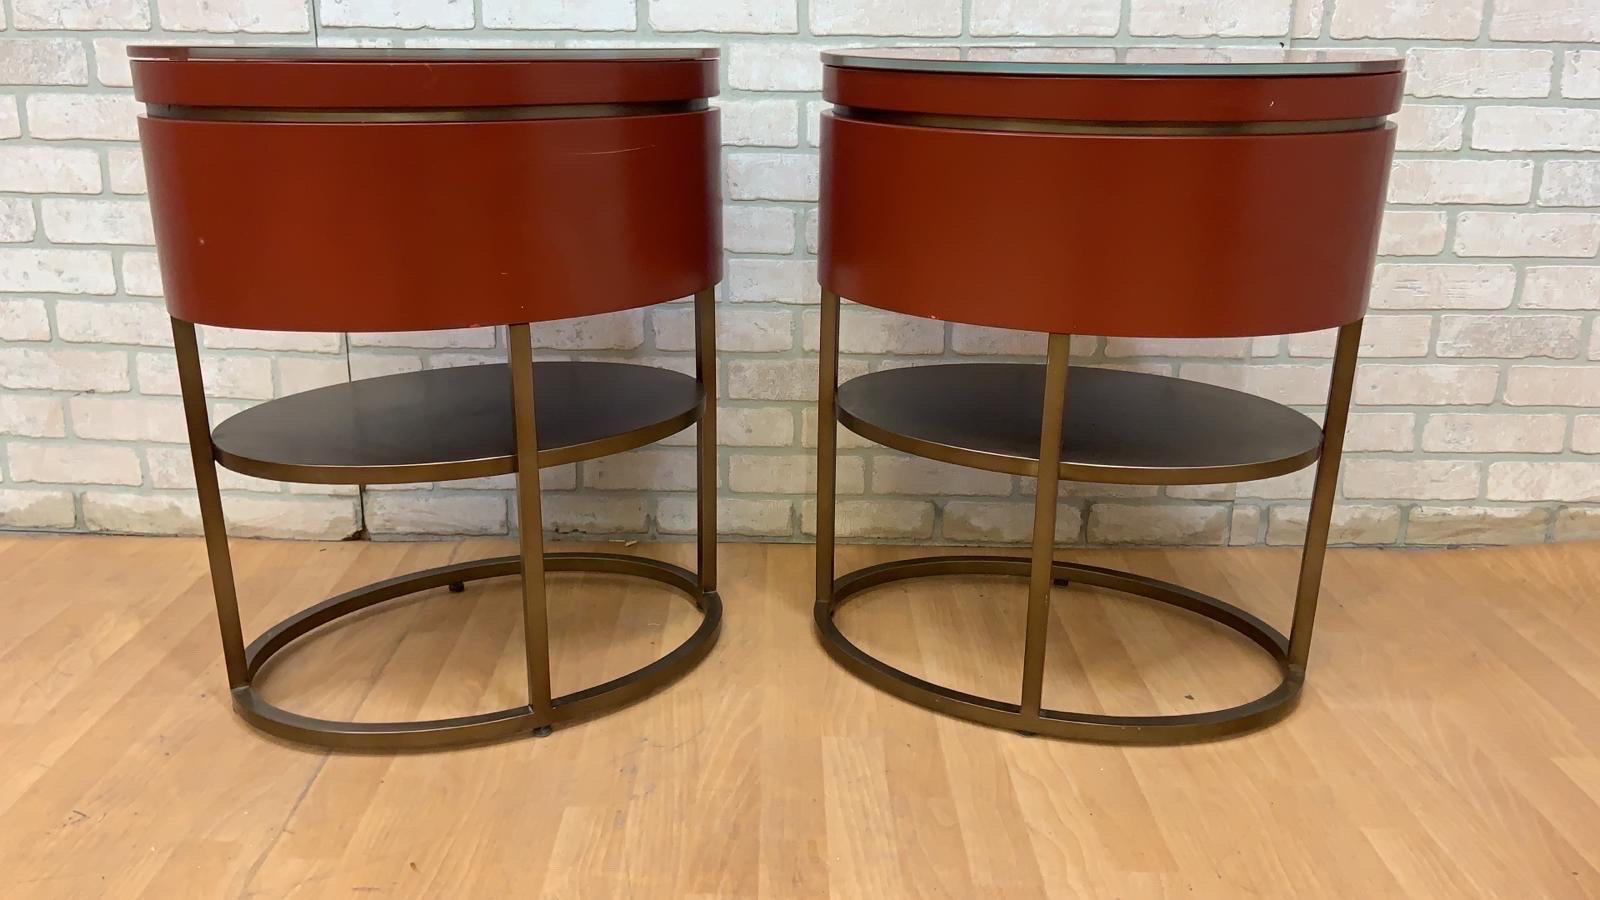 Vintage Contemporary Custom Designed Oval Side Table/Night-Stands - Pair 

Vintage Custom Designer Contemporary Oval Deep Red Lacquered Wood with Brushed Brass Stand & Tinted Glass 2 Tier, Single Drawer Side-Tables. We Acquired these from The James